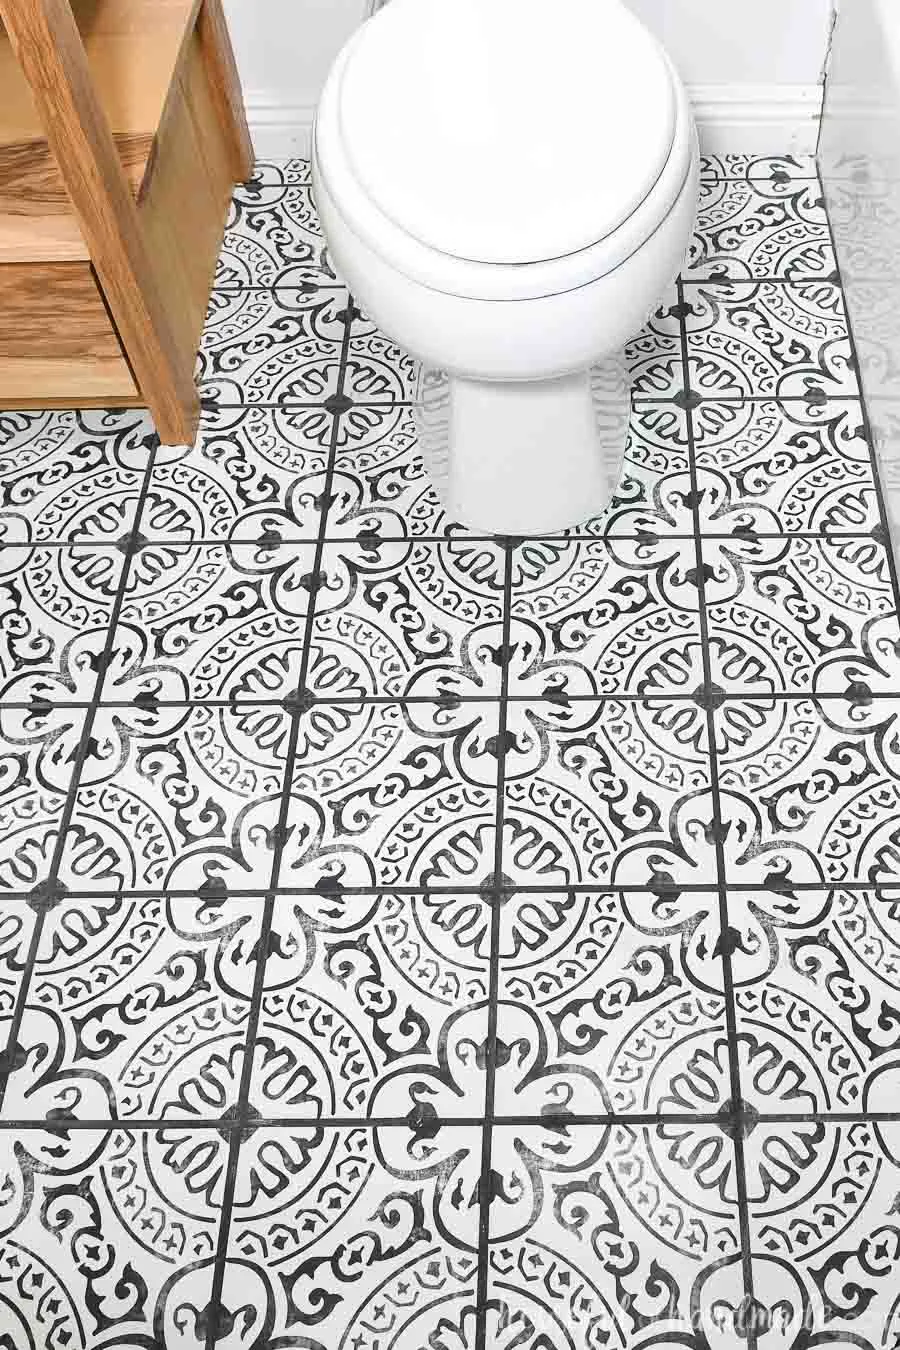 Laying Floor Tiles In A Small Bathroom, 4 Tile Patterns For Floors